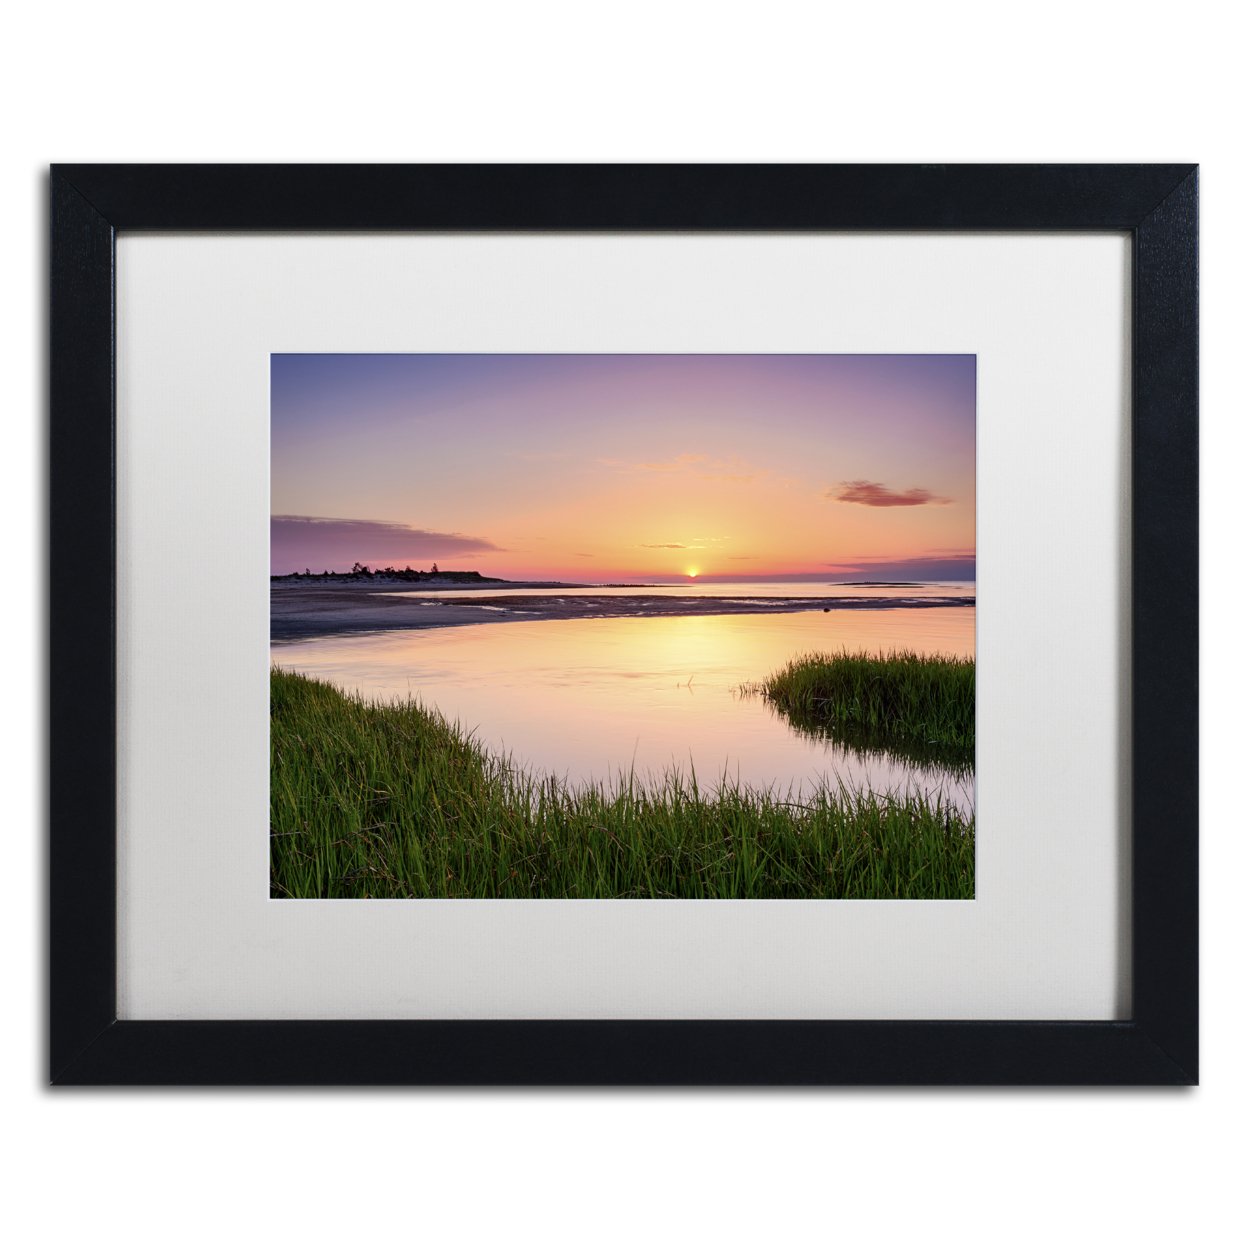 Michael Blanchette Photography 'Out To Sea' Black Wooden Framed Art 18 X 22 Inches